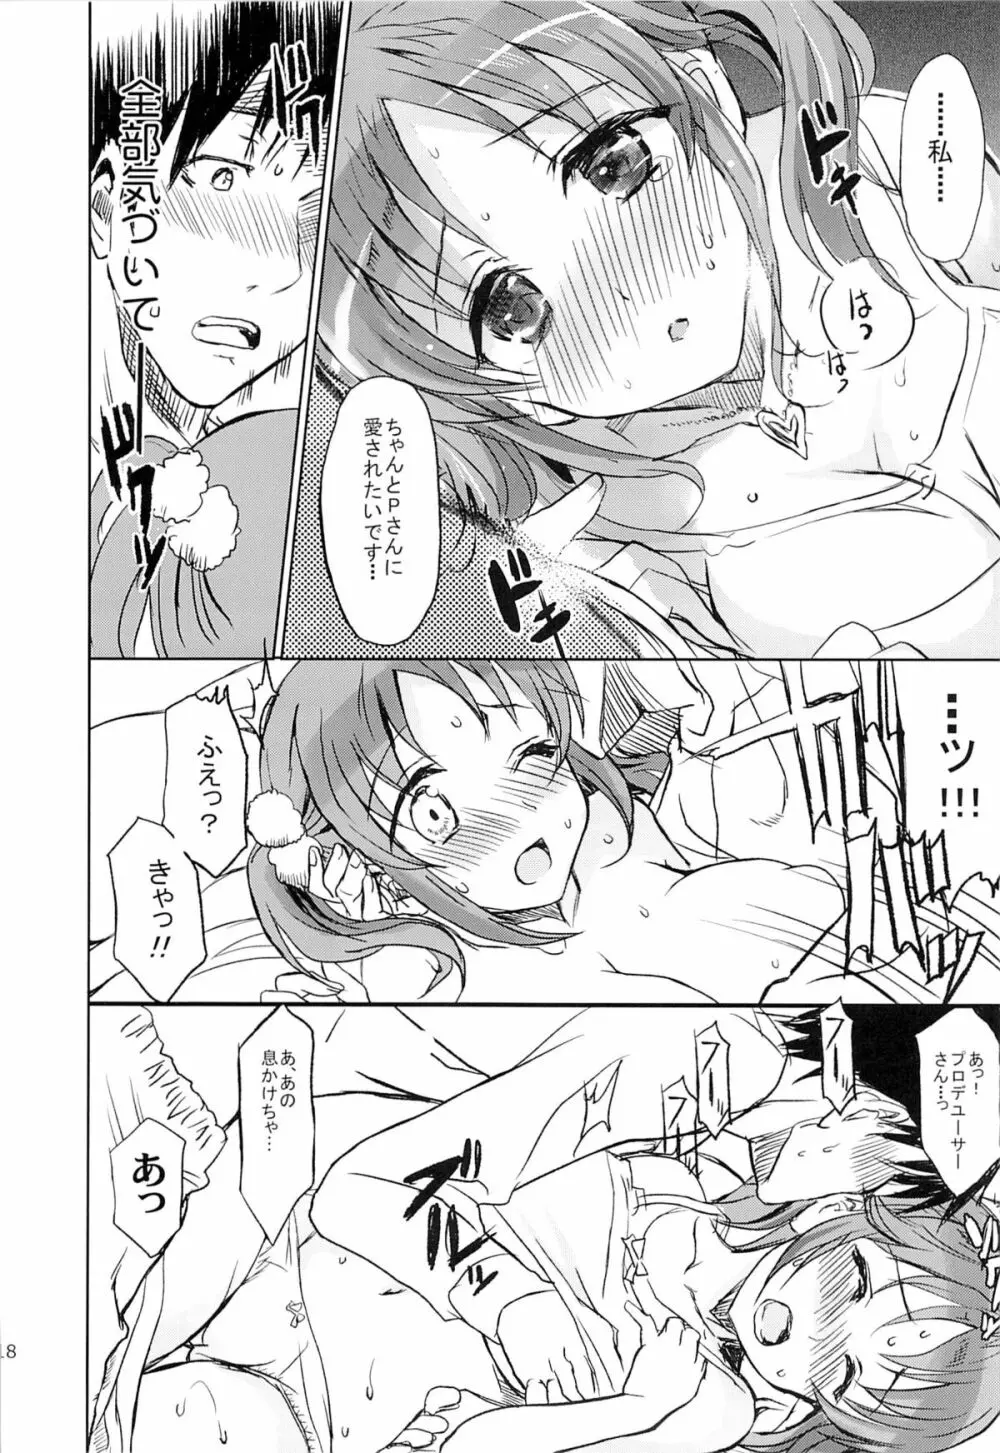 Passion Fruit Girls #十時愛梨 プリンセスバニーは眠らない。 Page.17